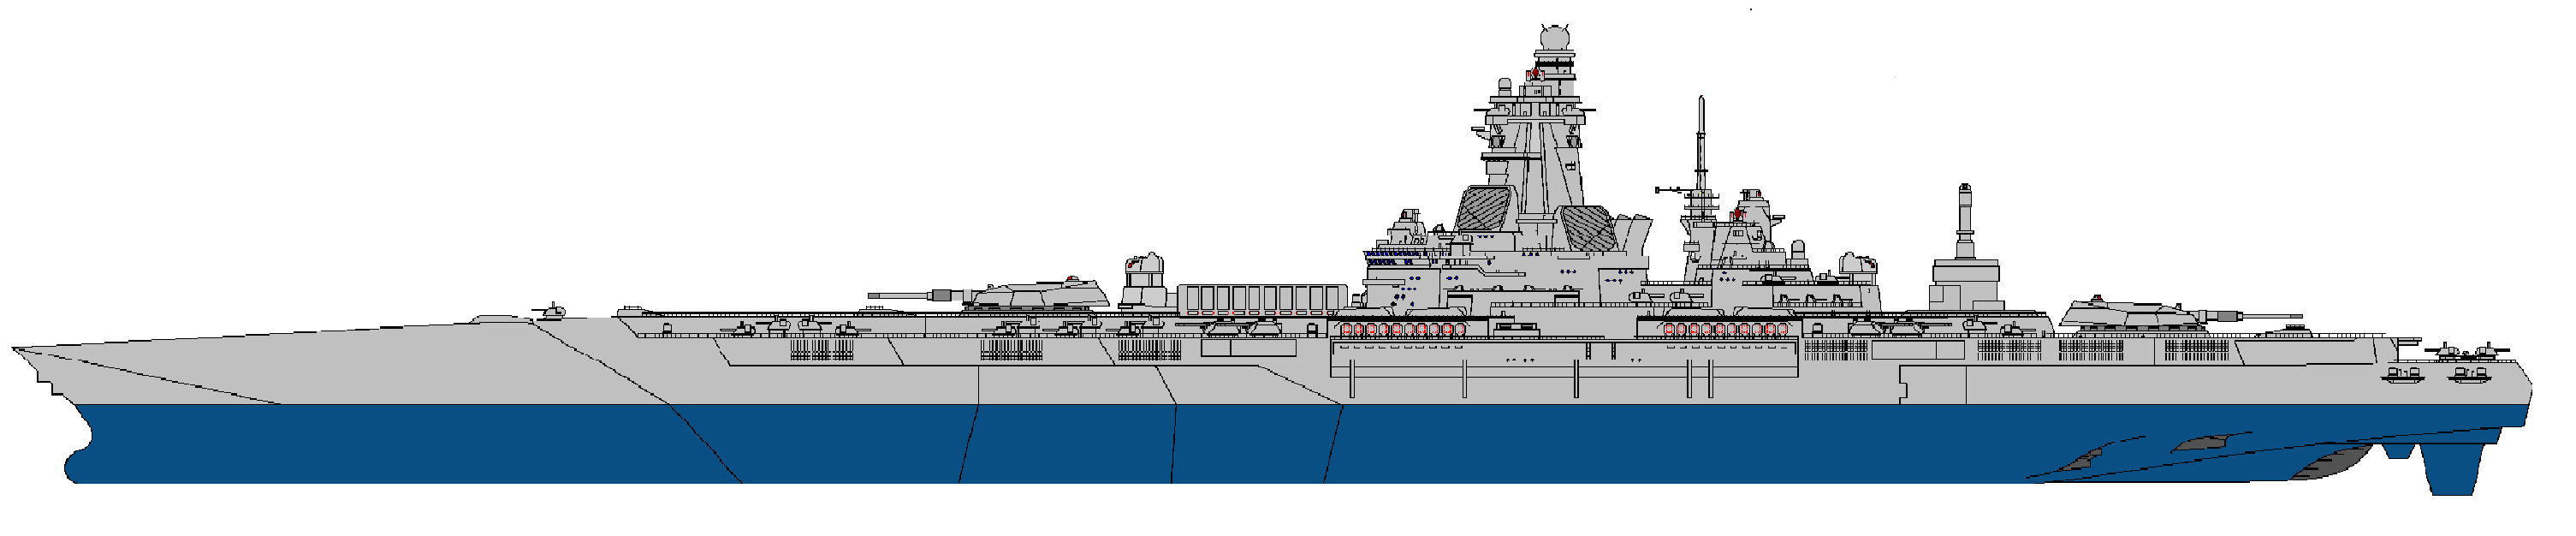 Unity Class Guided Missile Battleship.png - Battleship, Transparent background PNG HD thumbnail